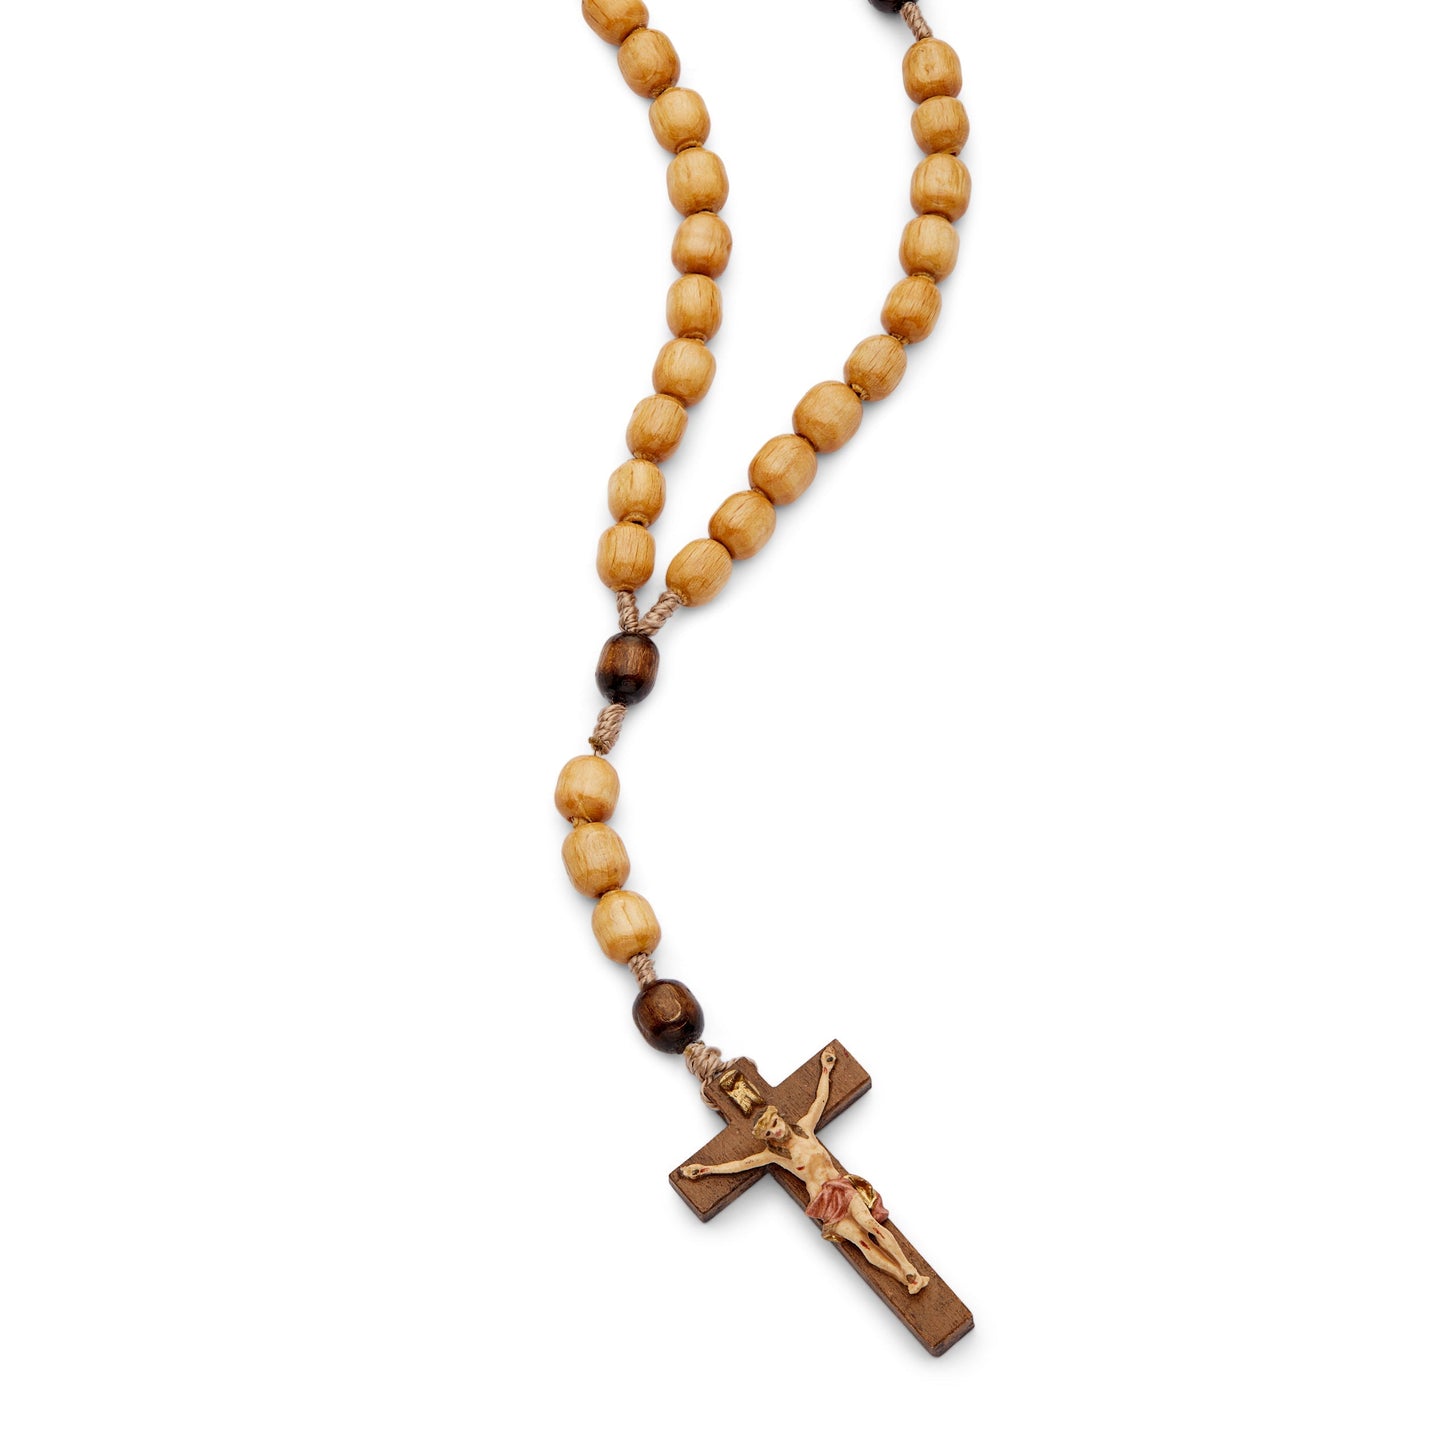 MONDO CATTOLICO Prayer Beads Wooden Rosary with a Coloured Crucifix